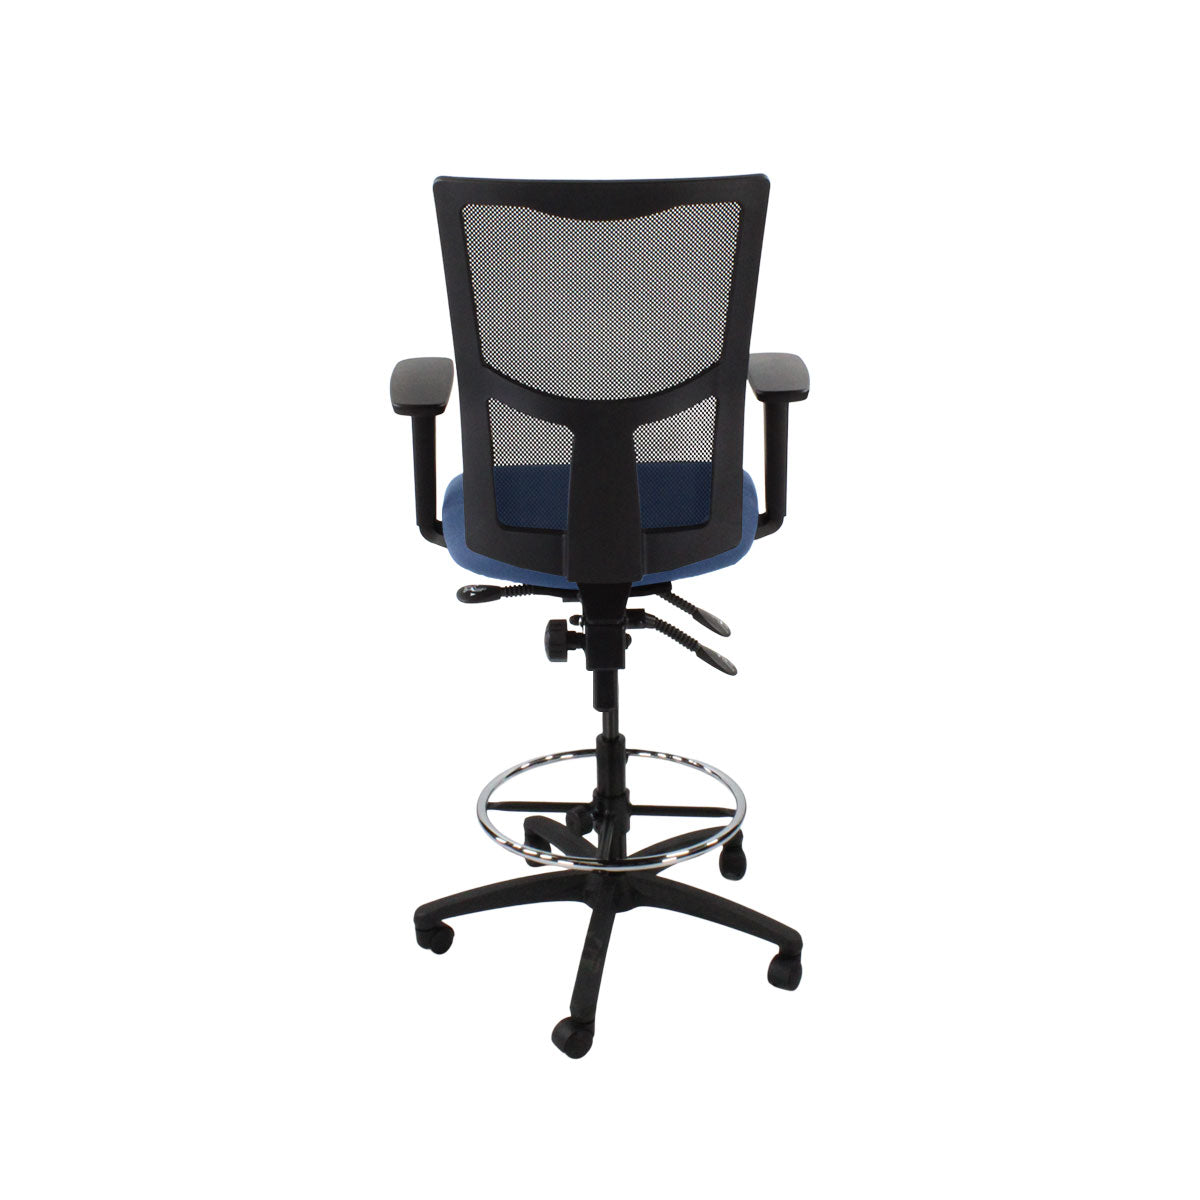 TOC: Ergo 2 Draughtsman Chair in Blue Fabric - Refurbished